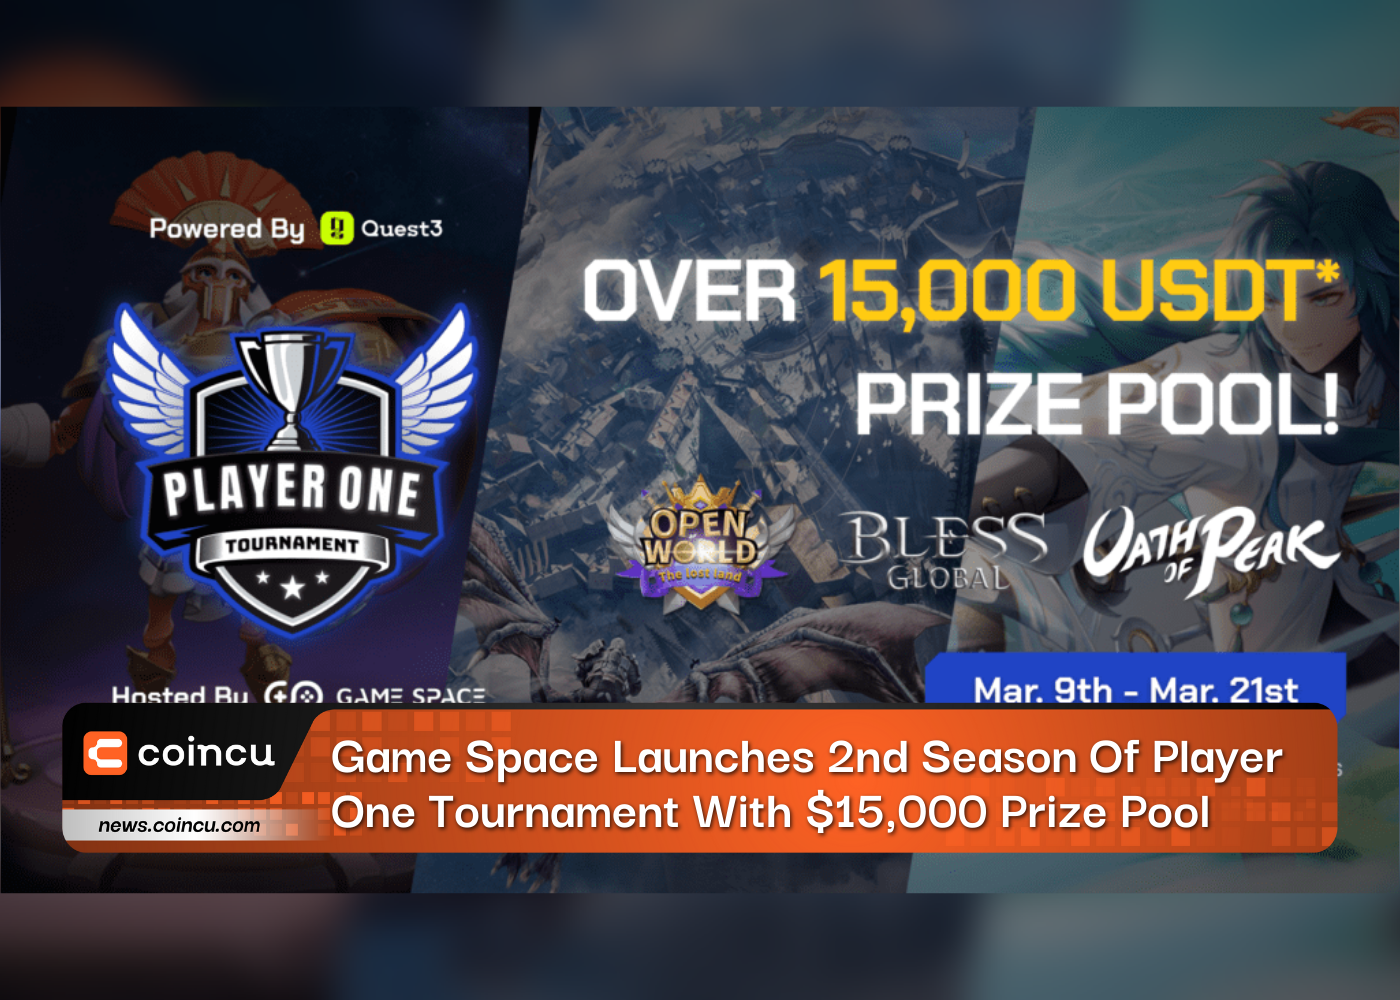 Game Space Launches 2nd Season Of Player One Tournament With $15,000 Prize Pool